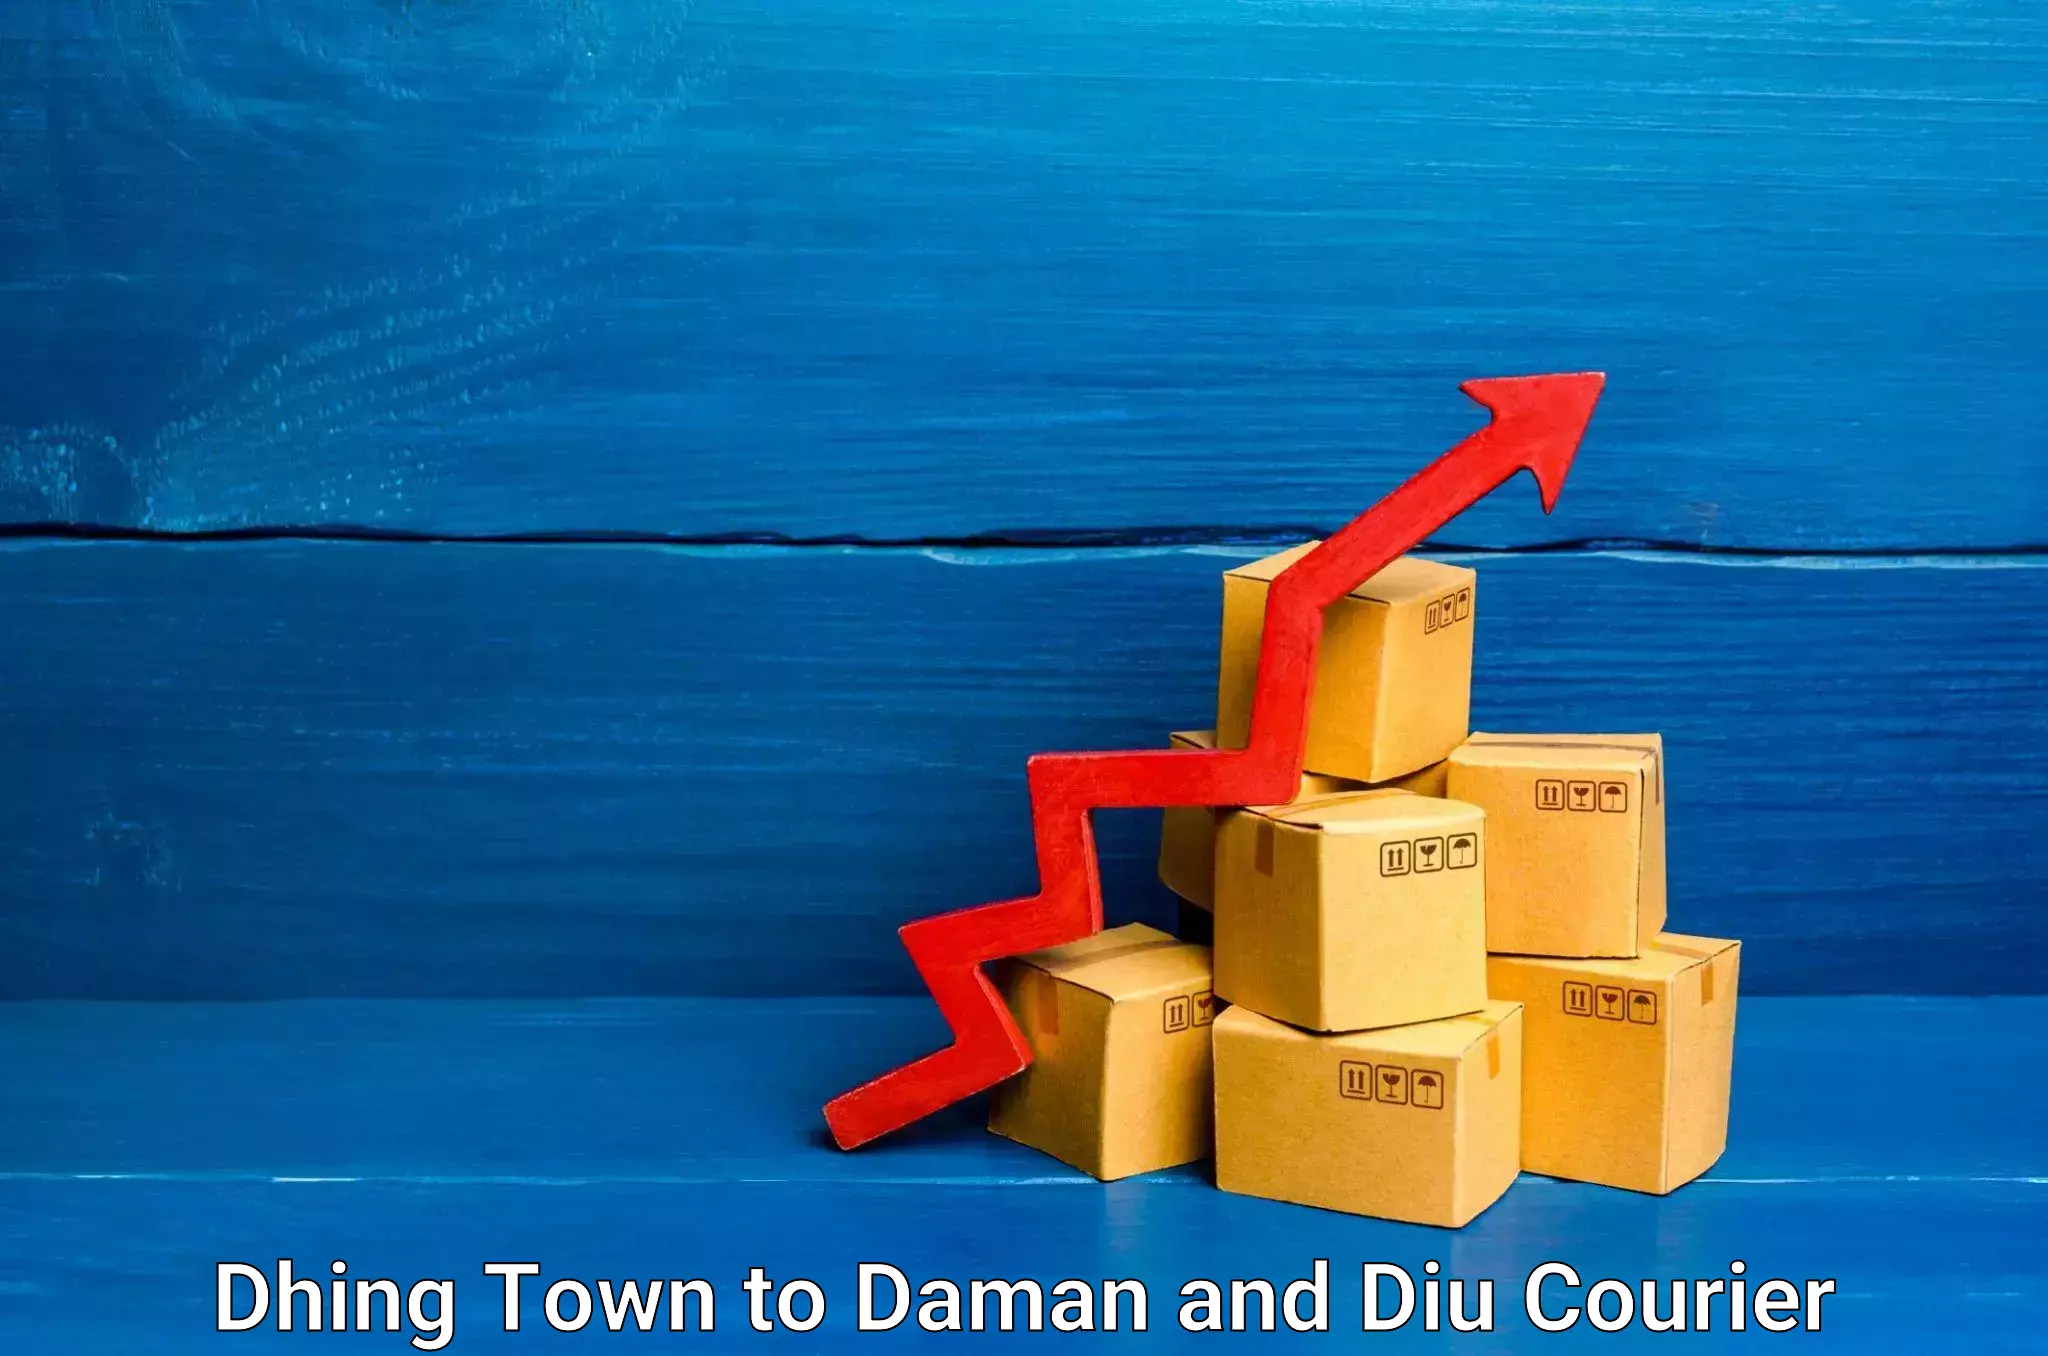 High-speed parcel service Dhing Town to Daman and Diu